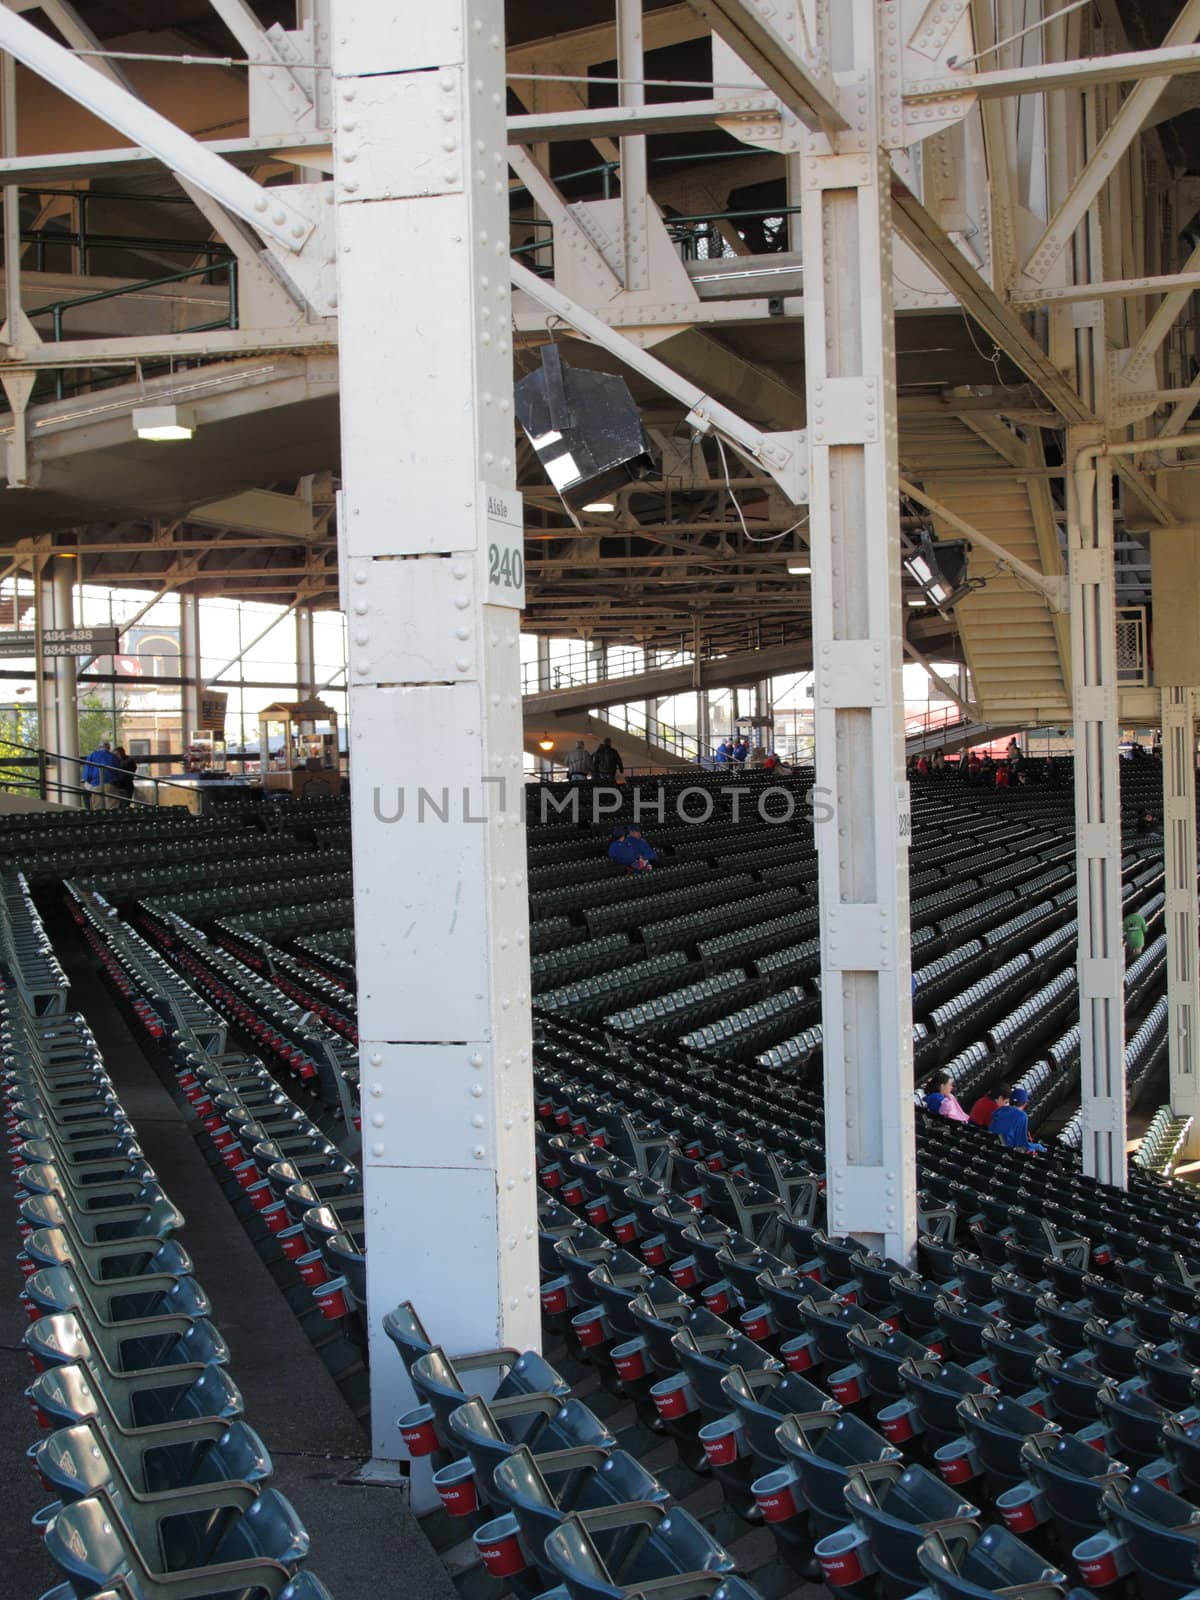 Obstructed seating at the Cubs old time home ballpark